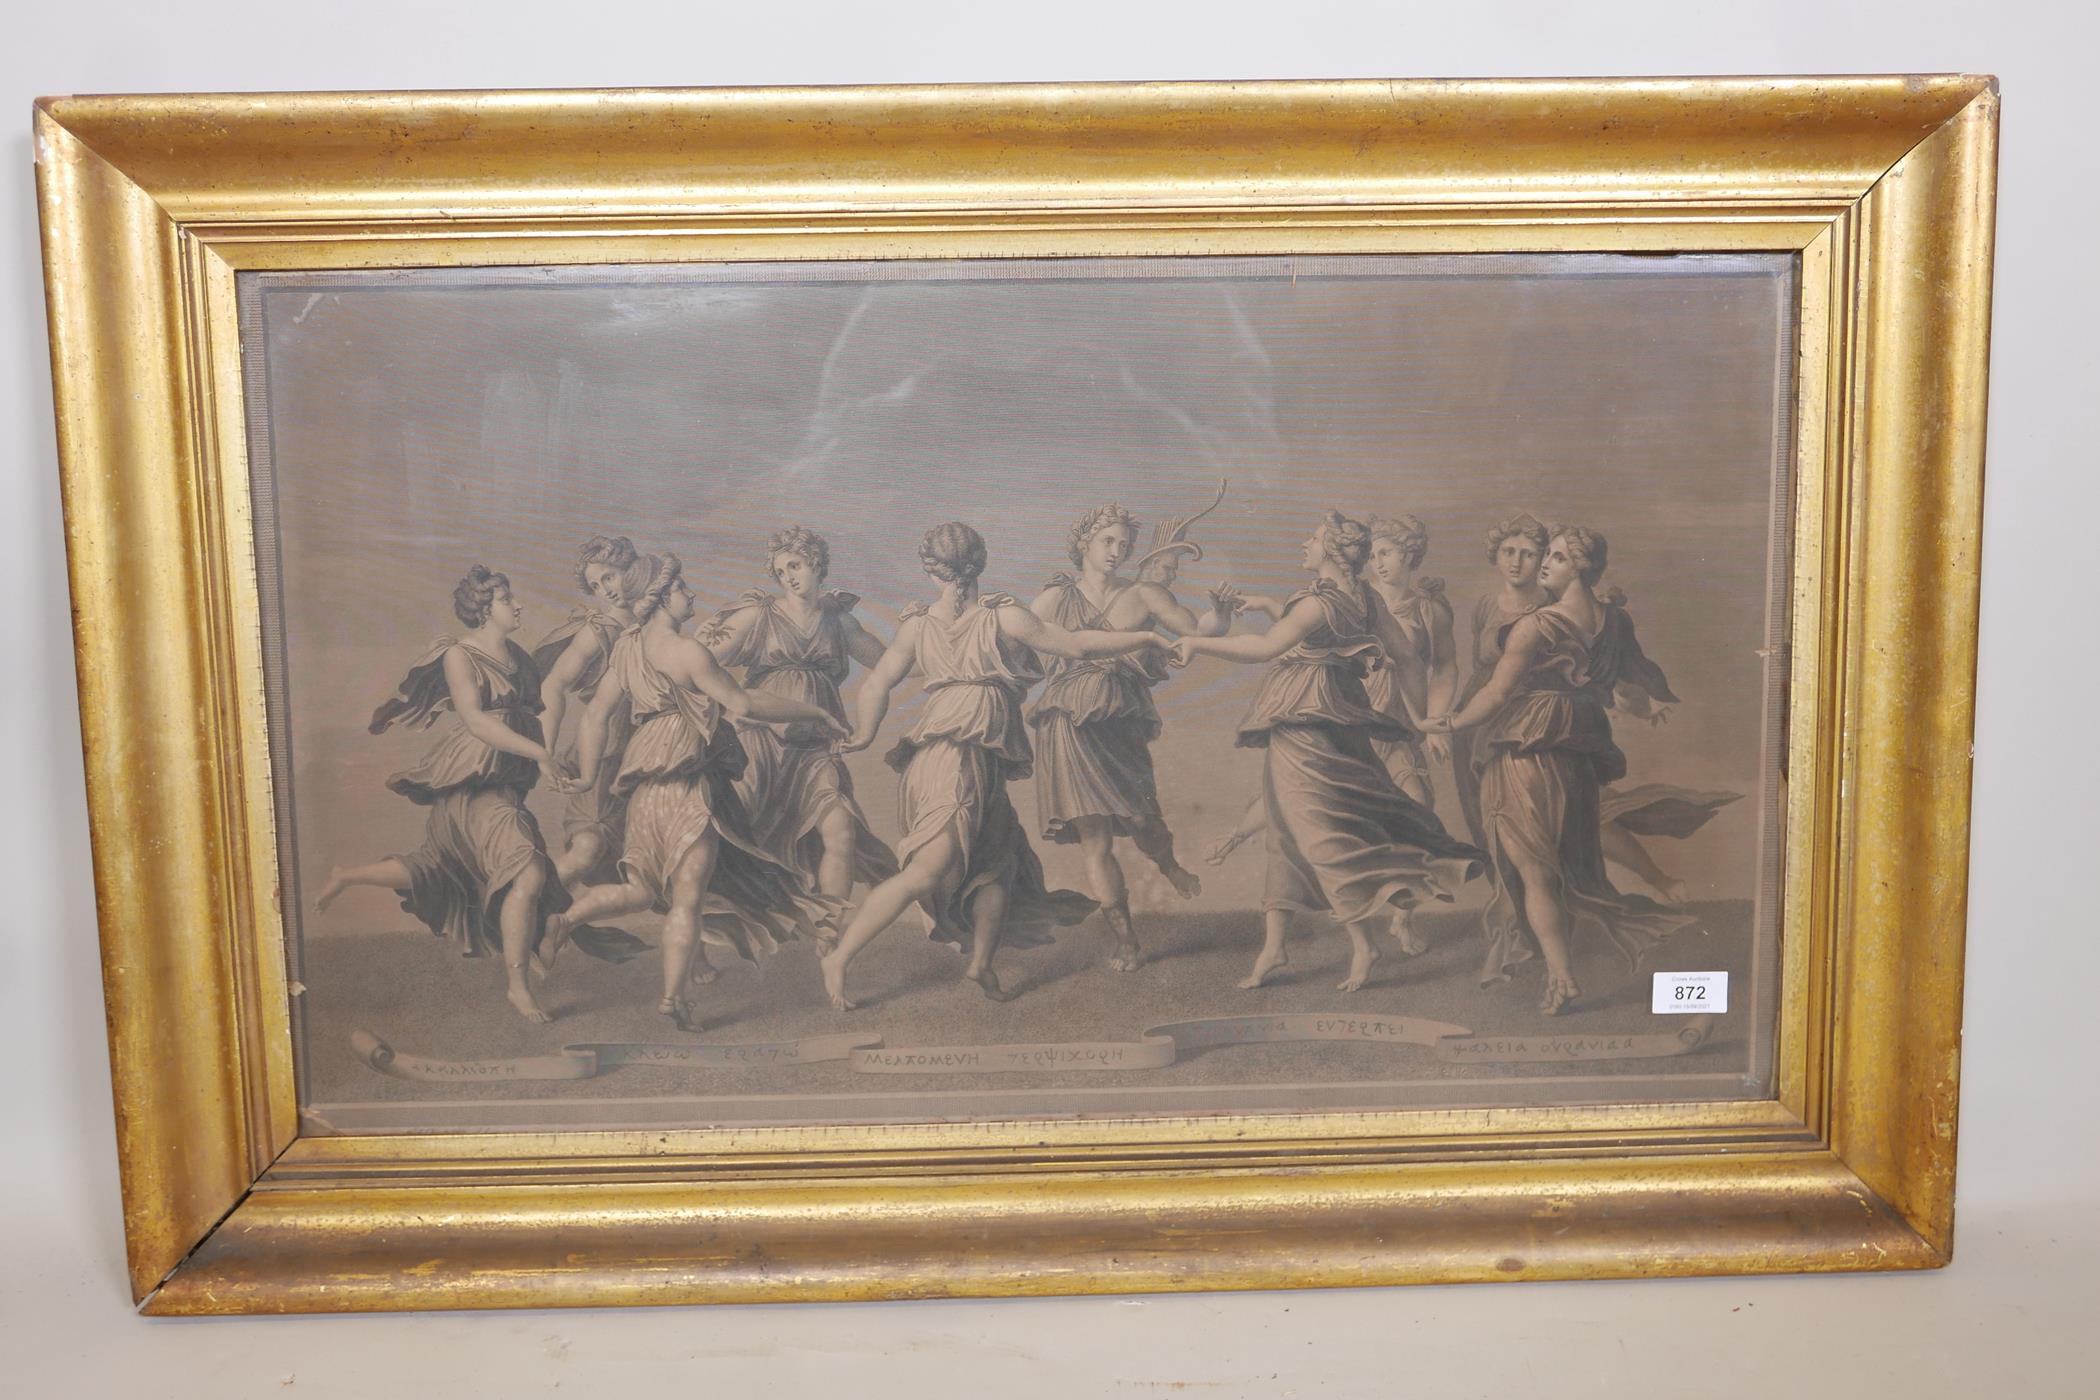 After Giulio Romano, Apollo dancing with the muses, an C18th/C19th French engraving, published by - Image 2 of 5